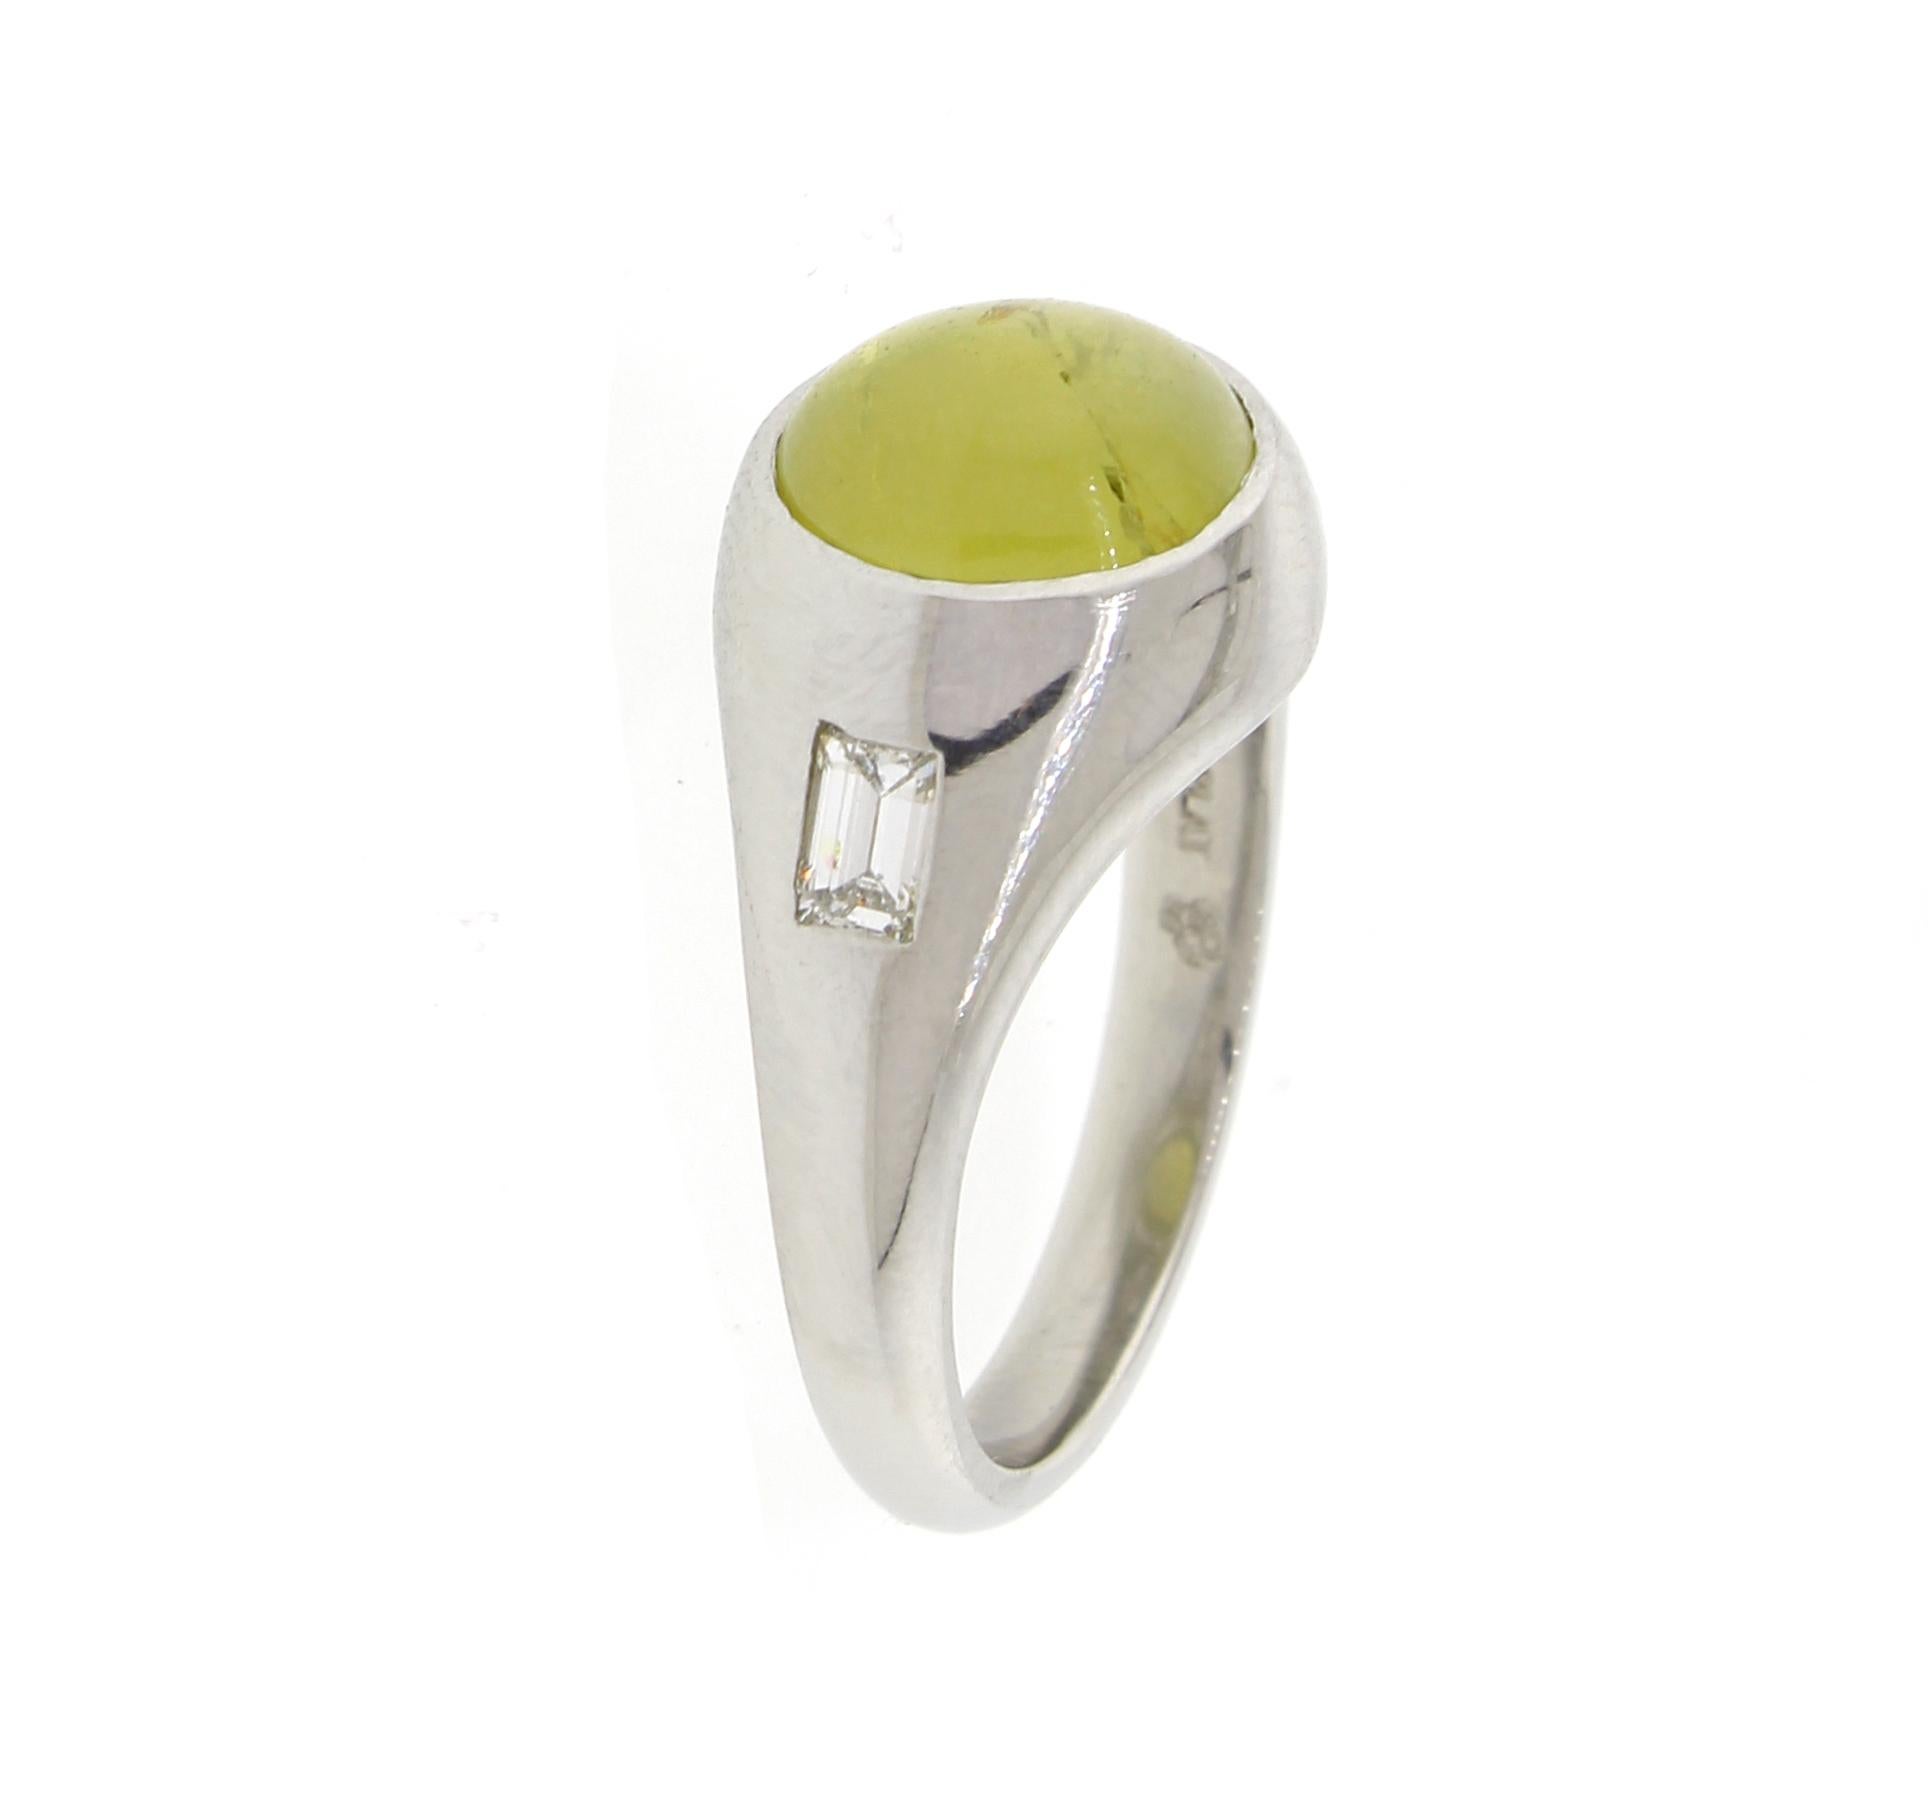 A green and honey  natural Chrysoberyl with a strong cat's eye is set in a platinum gypsy setting with two diamonds weighing .46 carats. The eye opens a closes cleanly, slightly included.